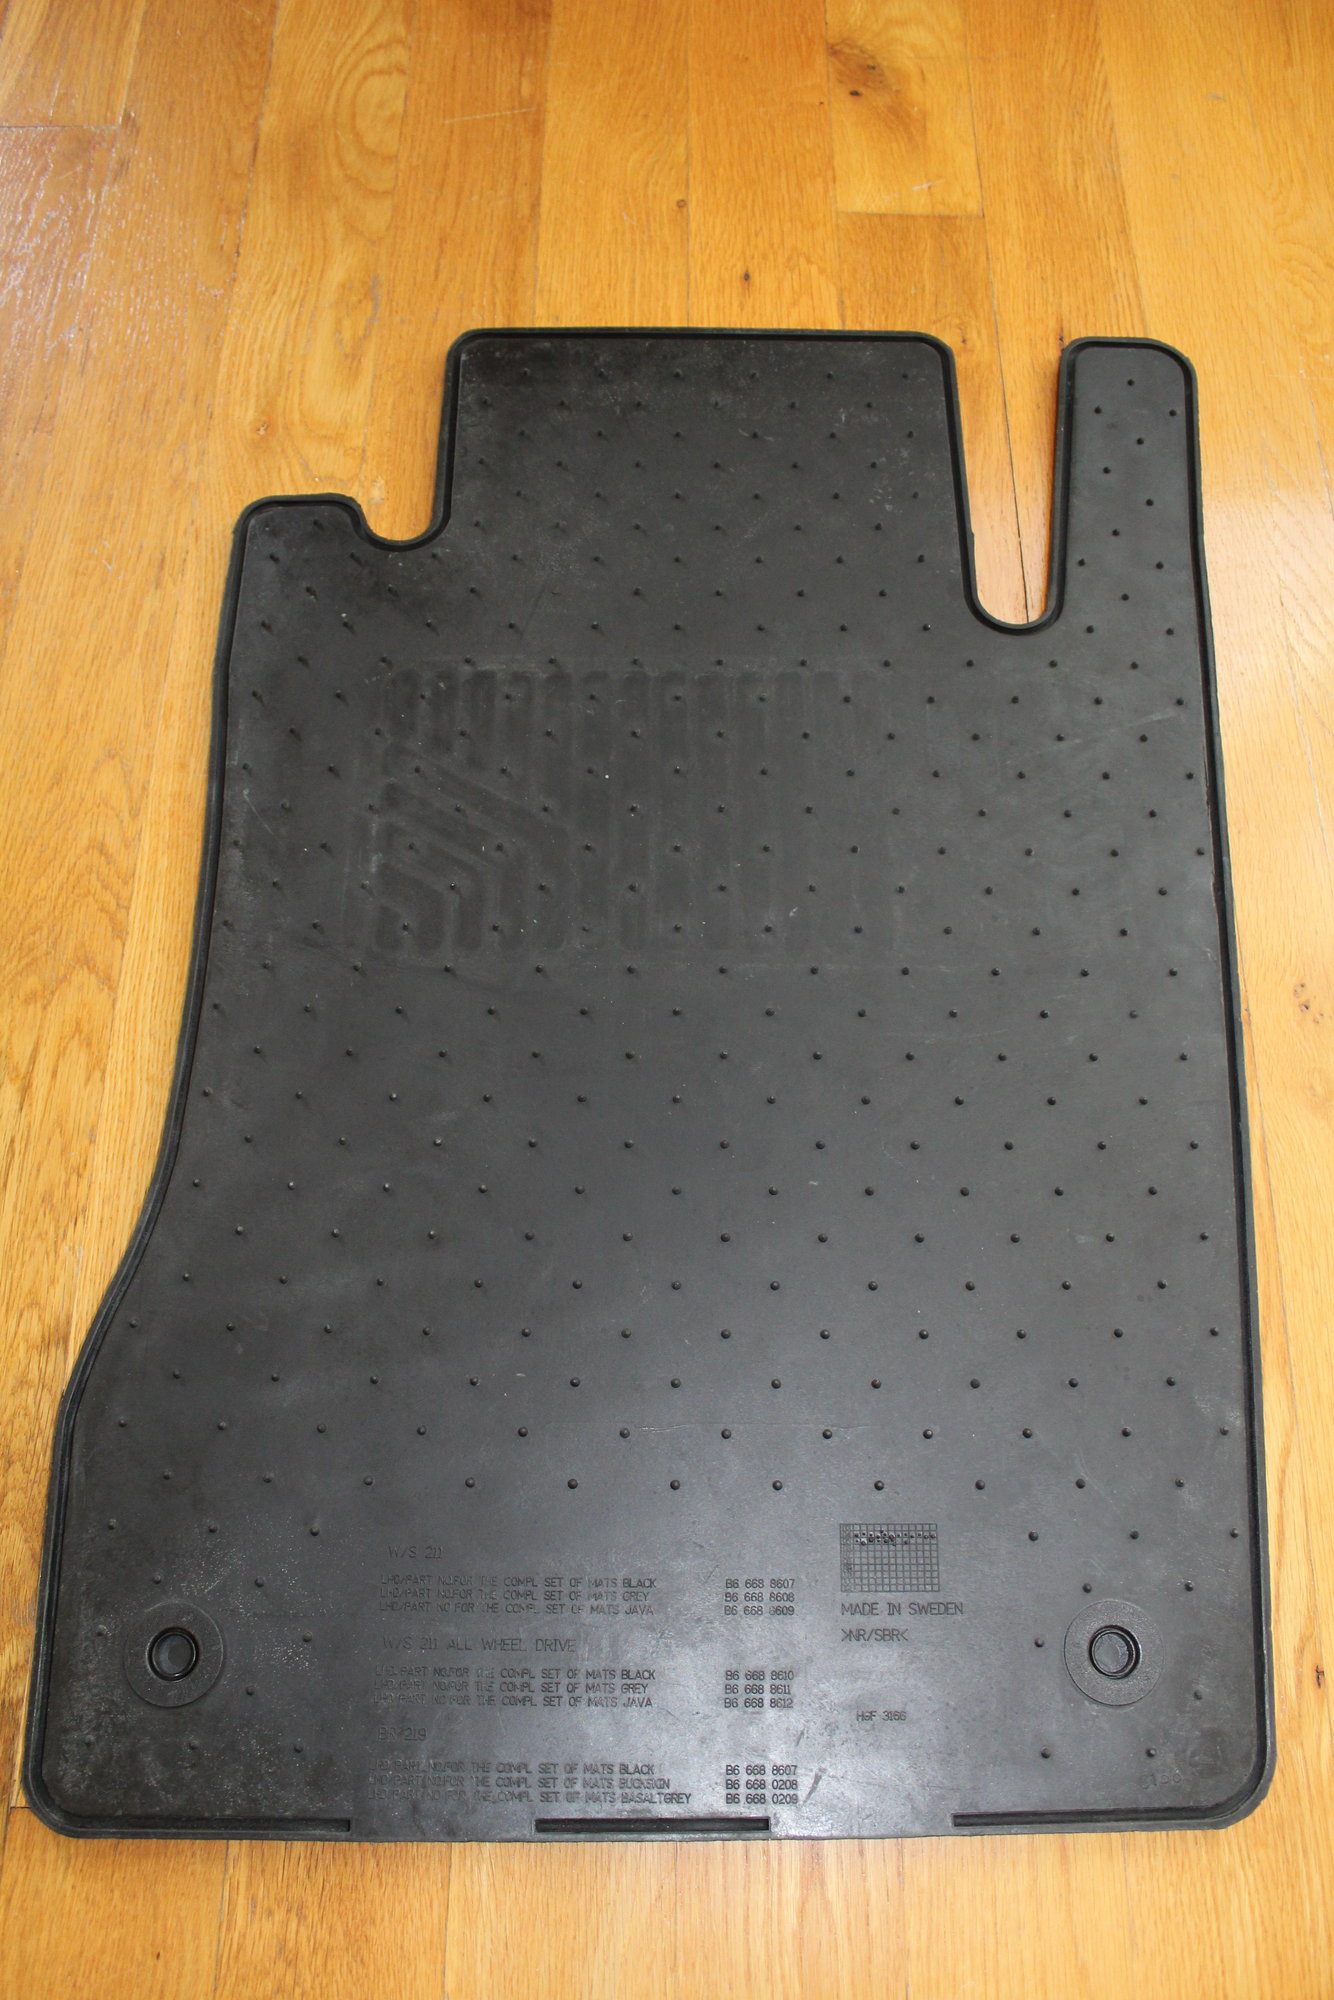 Interior/Upholstery - W211 Front Rubber Floor Mats/All Season Floor Mats - Non-4MATIC, Non-Station Wagon - Used - Shrewsbury, MA 01545, United States